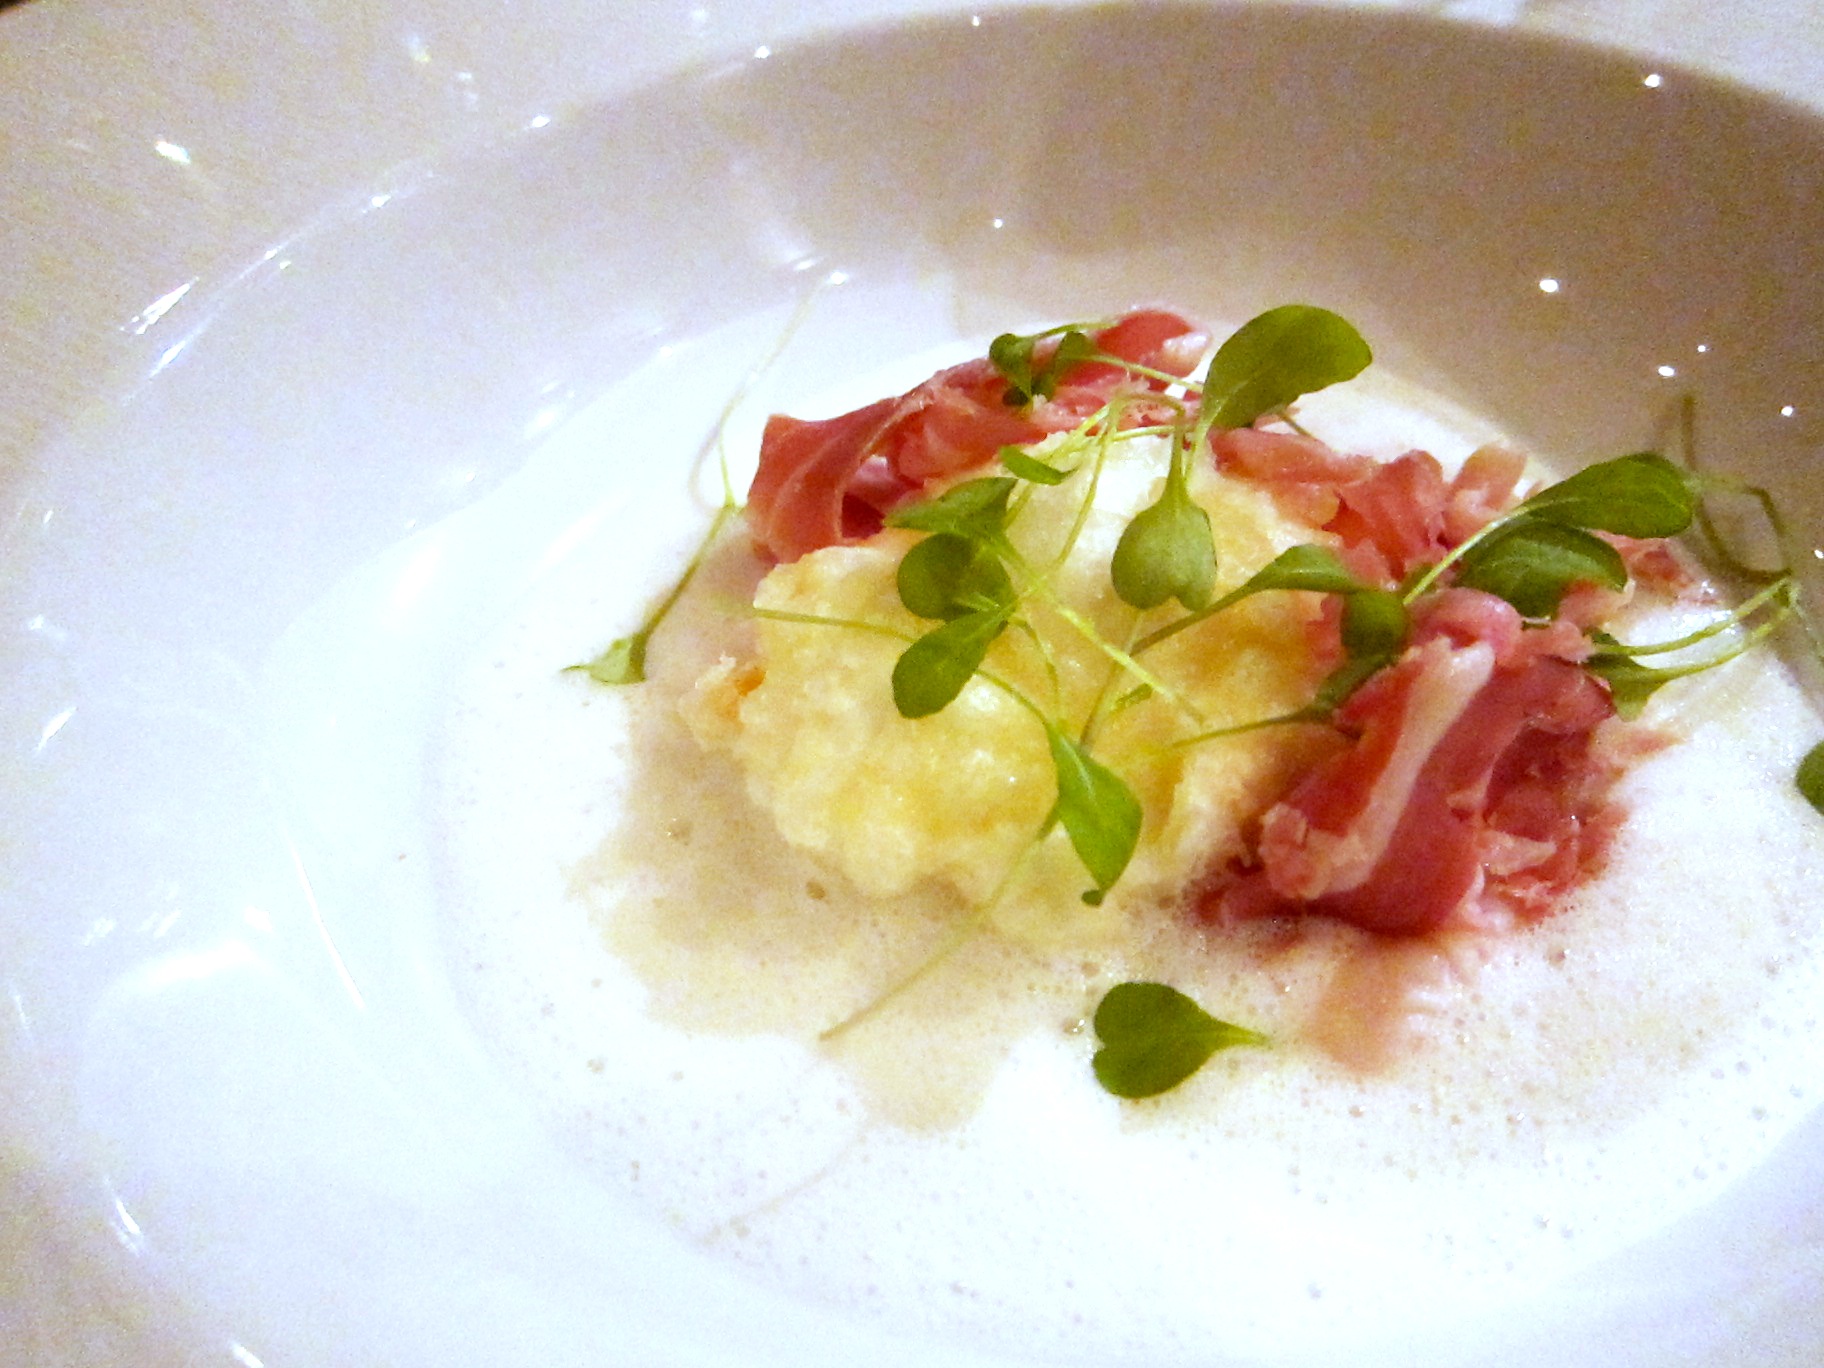 Appetizer: Crunchy Chicken Egg with Warm Parmesan Mousse, and Iberian Ham Shavings